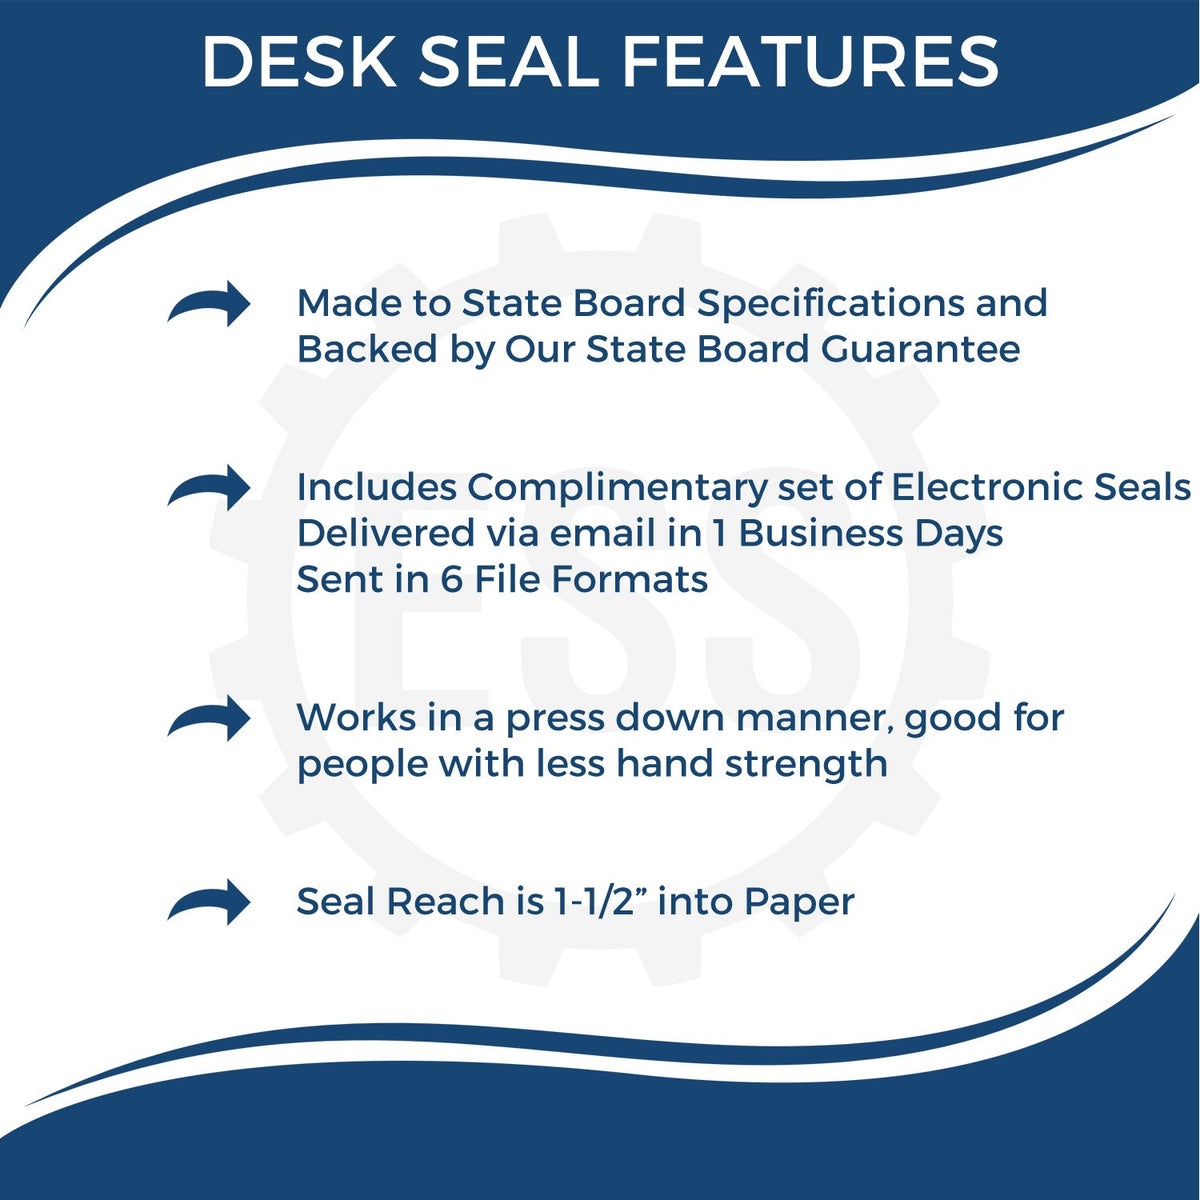 A picture of an infographic highlighting the selling points for the Vermont Geologist Desk Seal